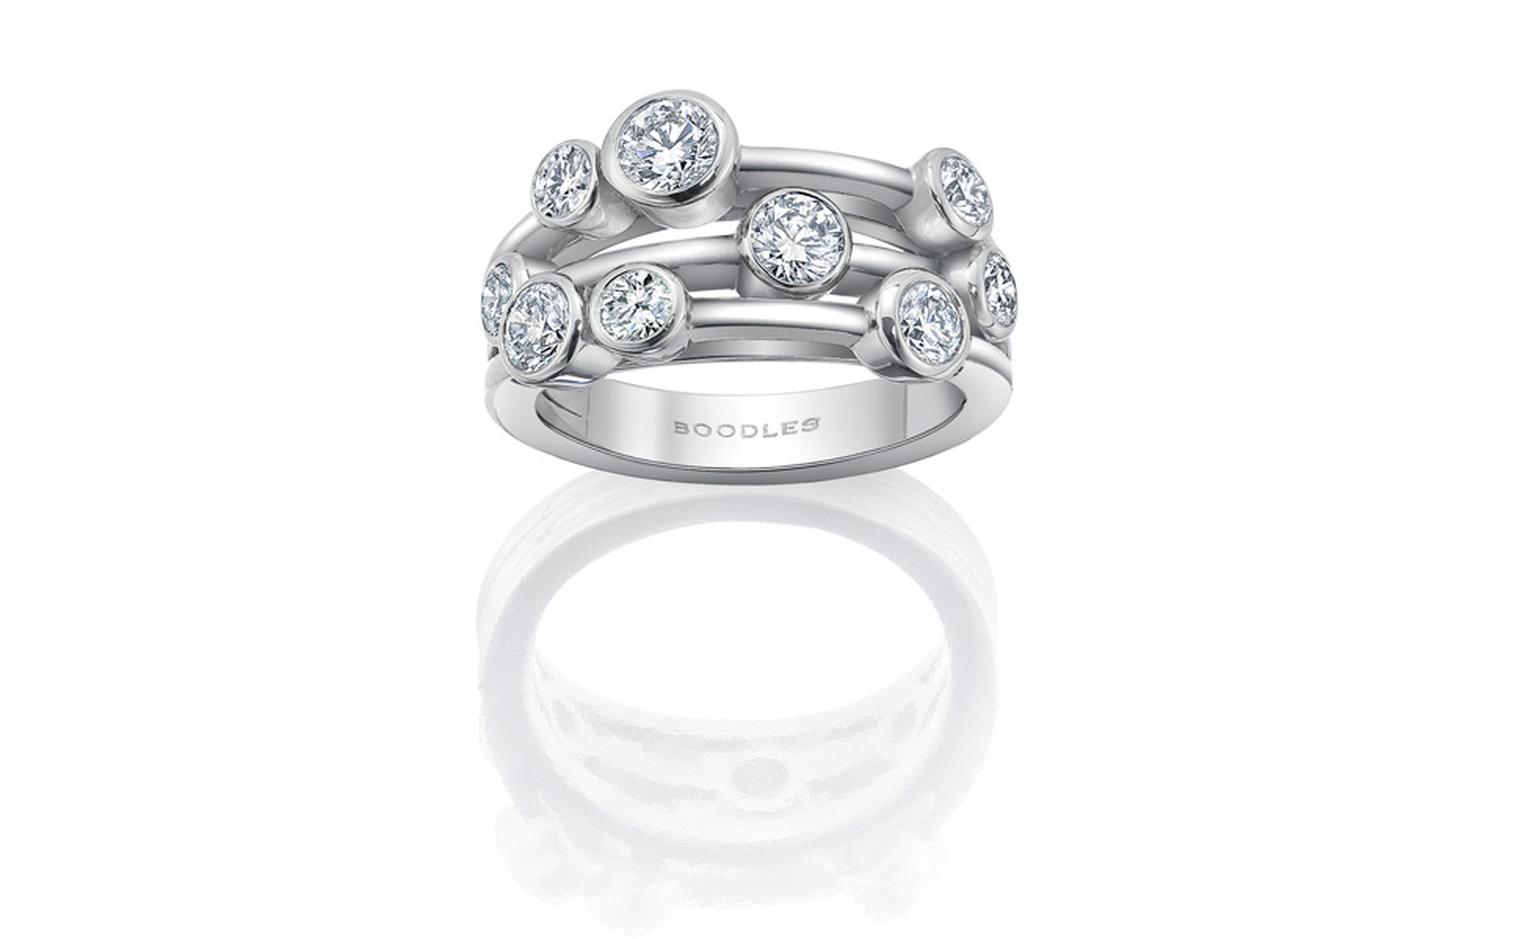 Boodles Signature Raindance ring from £7500